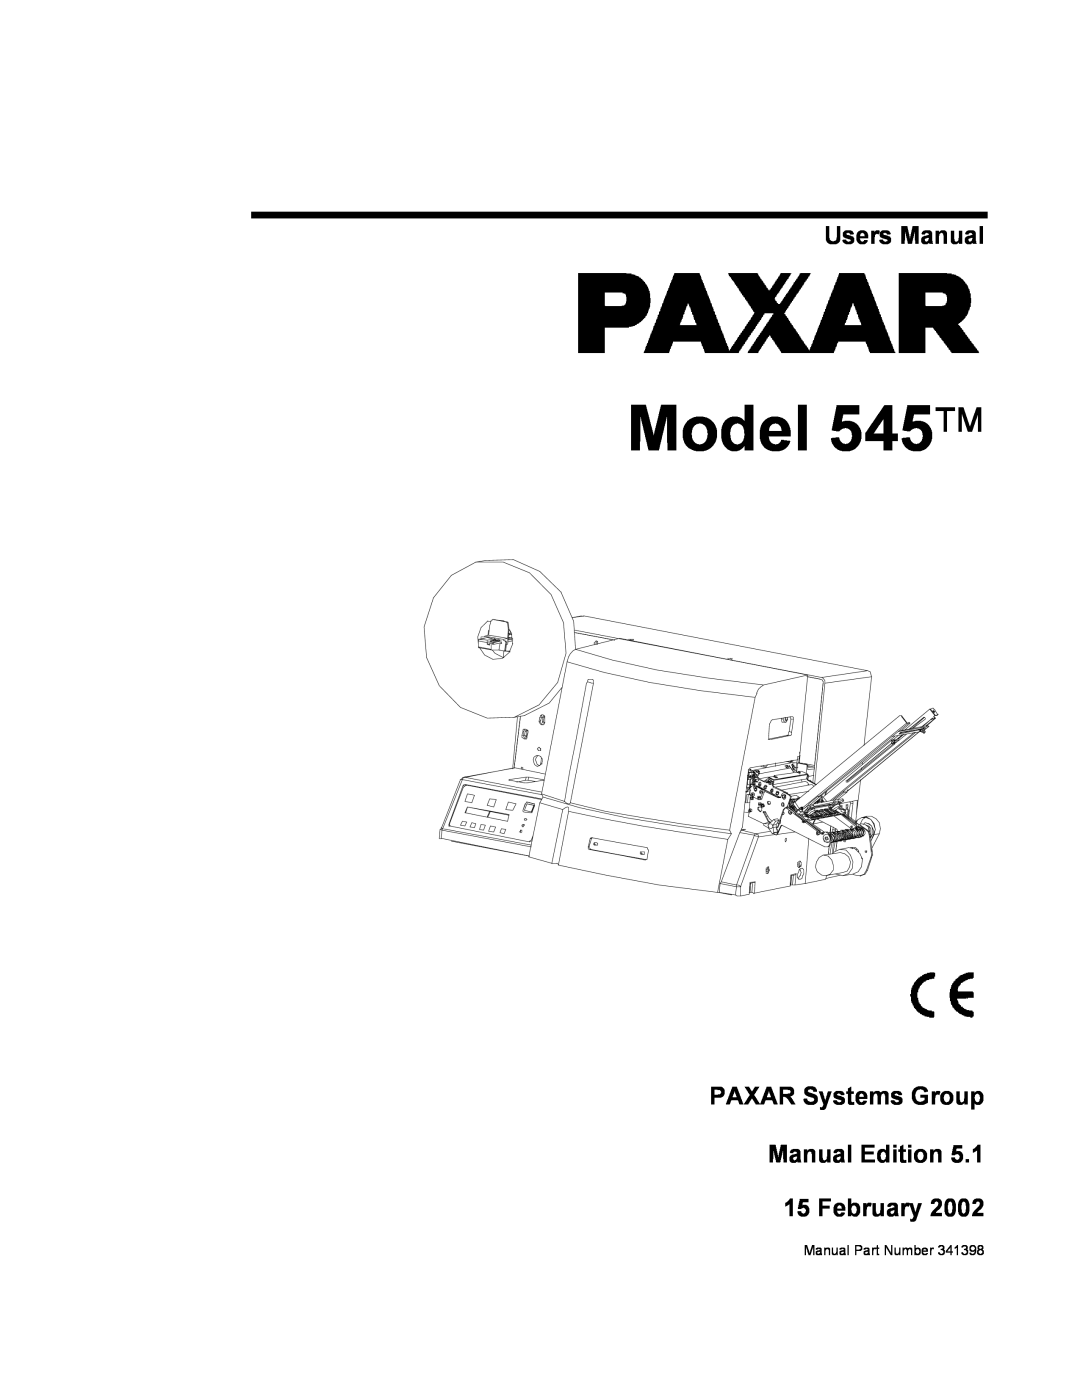 Paxar user manual Users Manual, PAXAR Systems Group Manual Edition 15 February, Model 545, Manual Part Number 